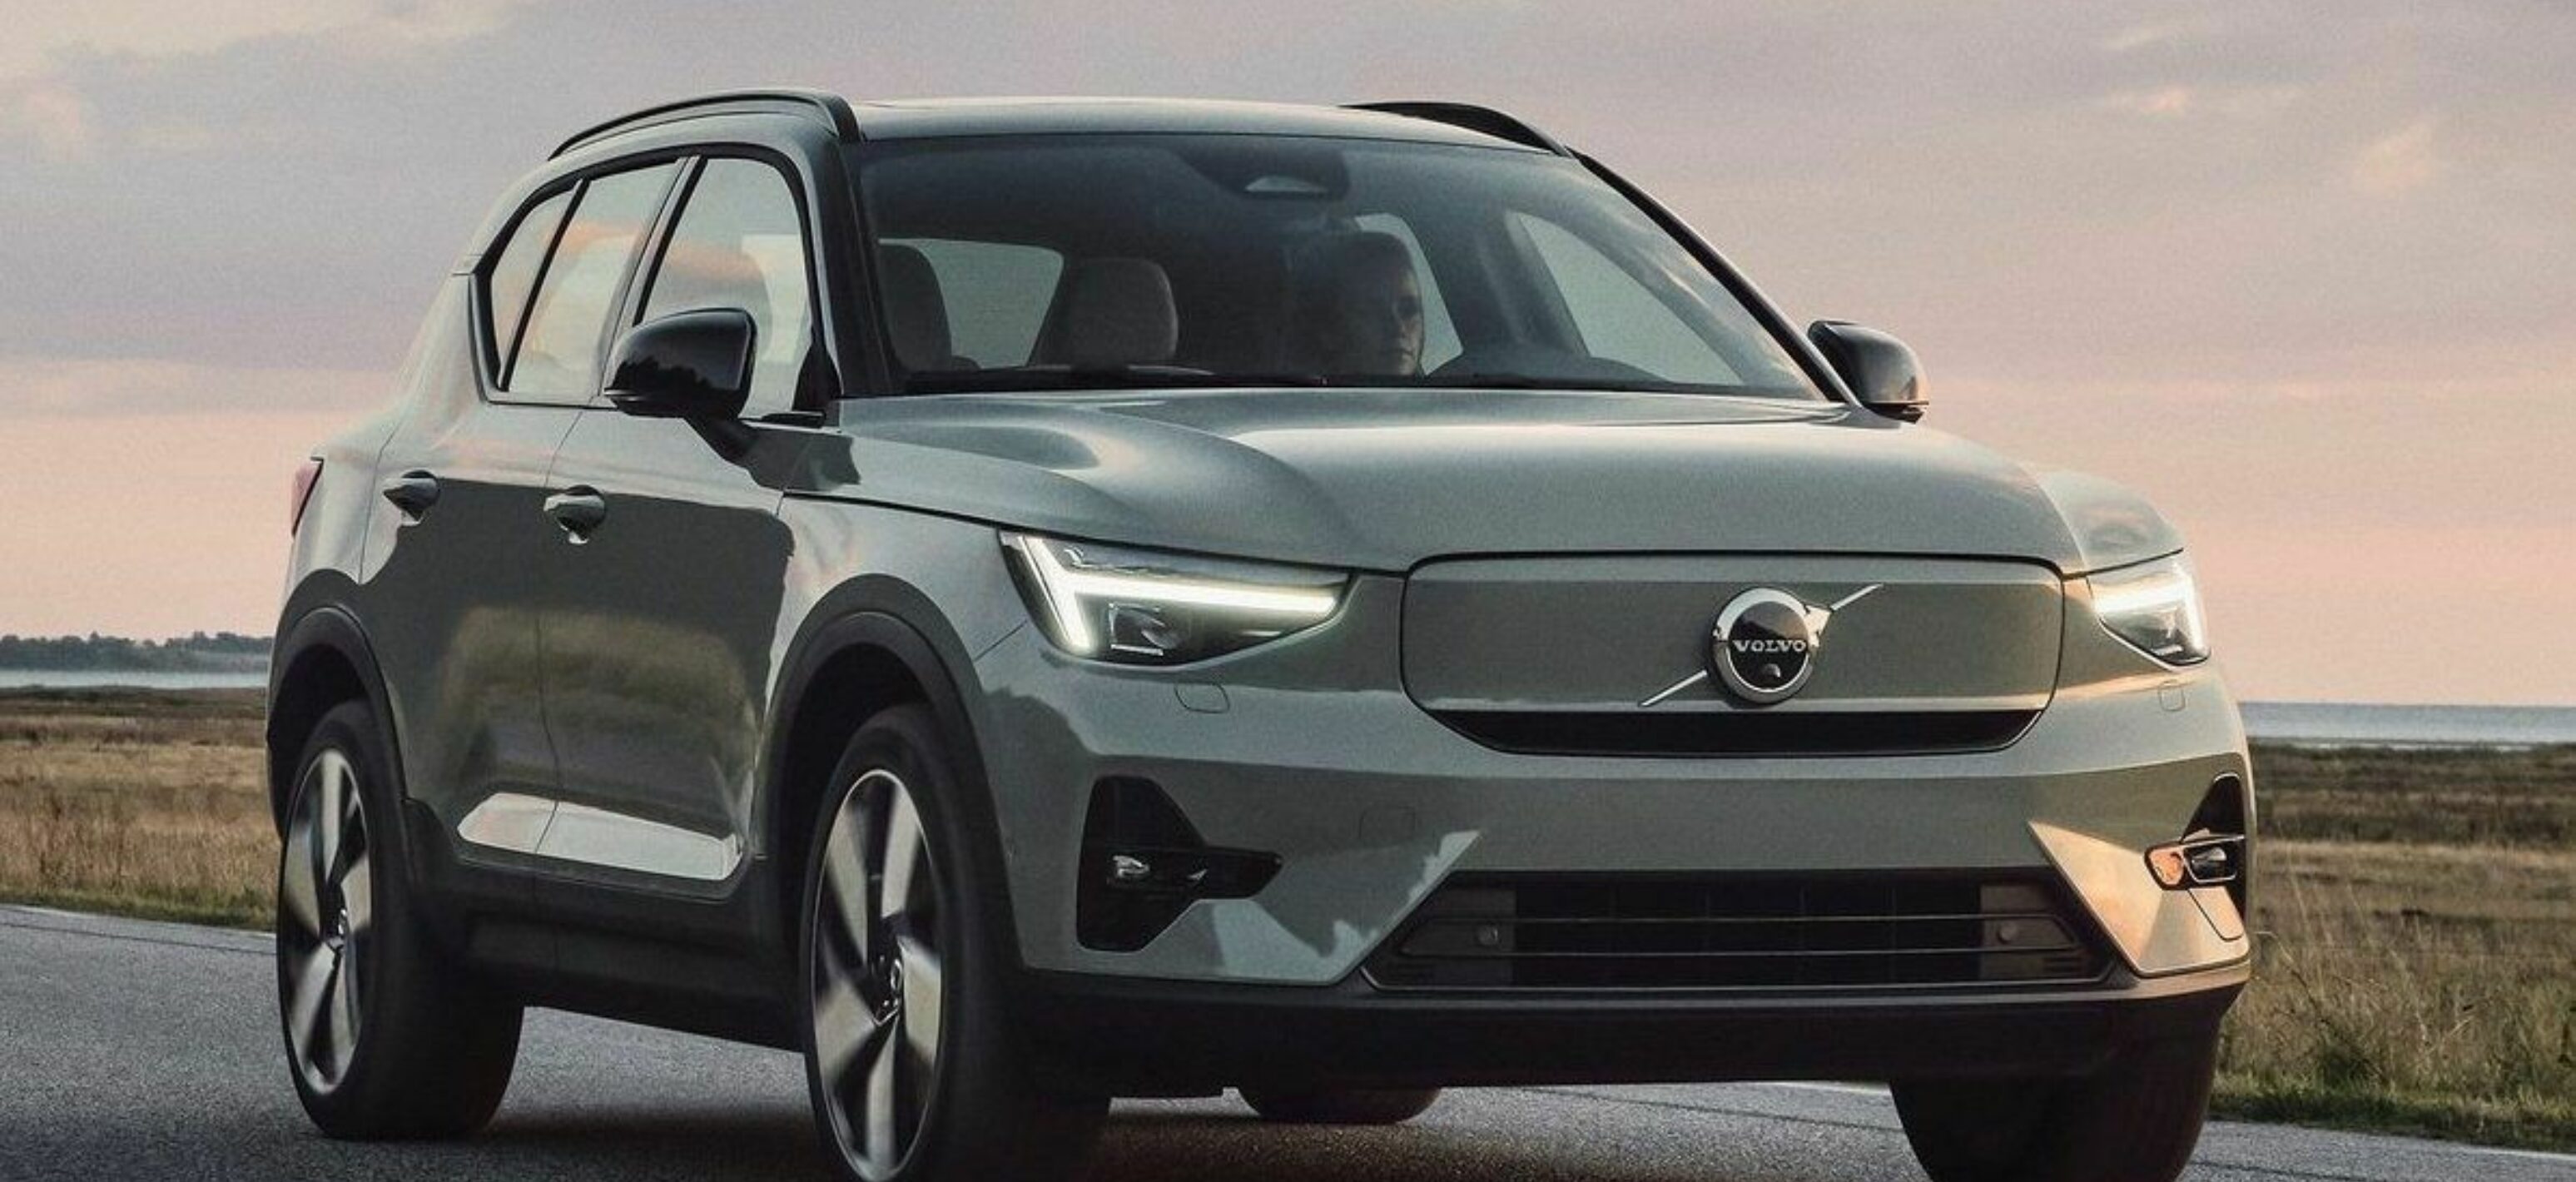 https://autofilter.sk/assets/images/xc40-recharge/gallery/volvo-xc40-recharge-2022_10-galeria.jpg - obrazok